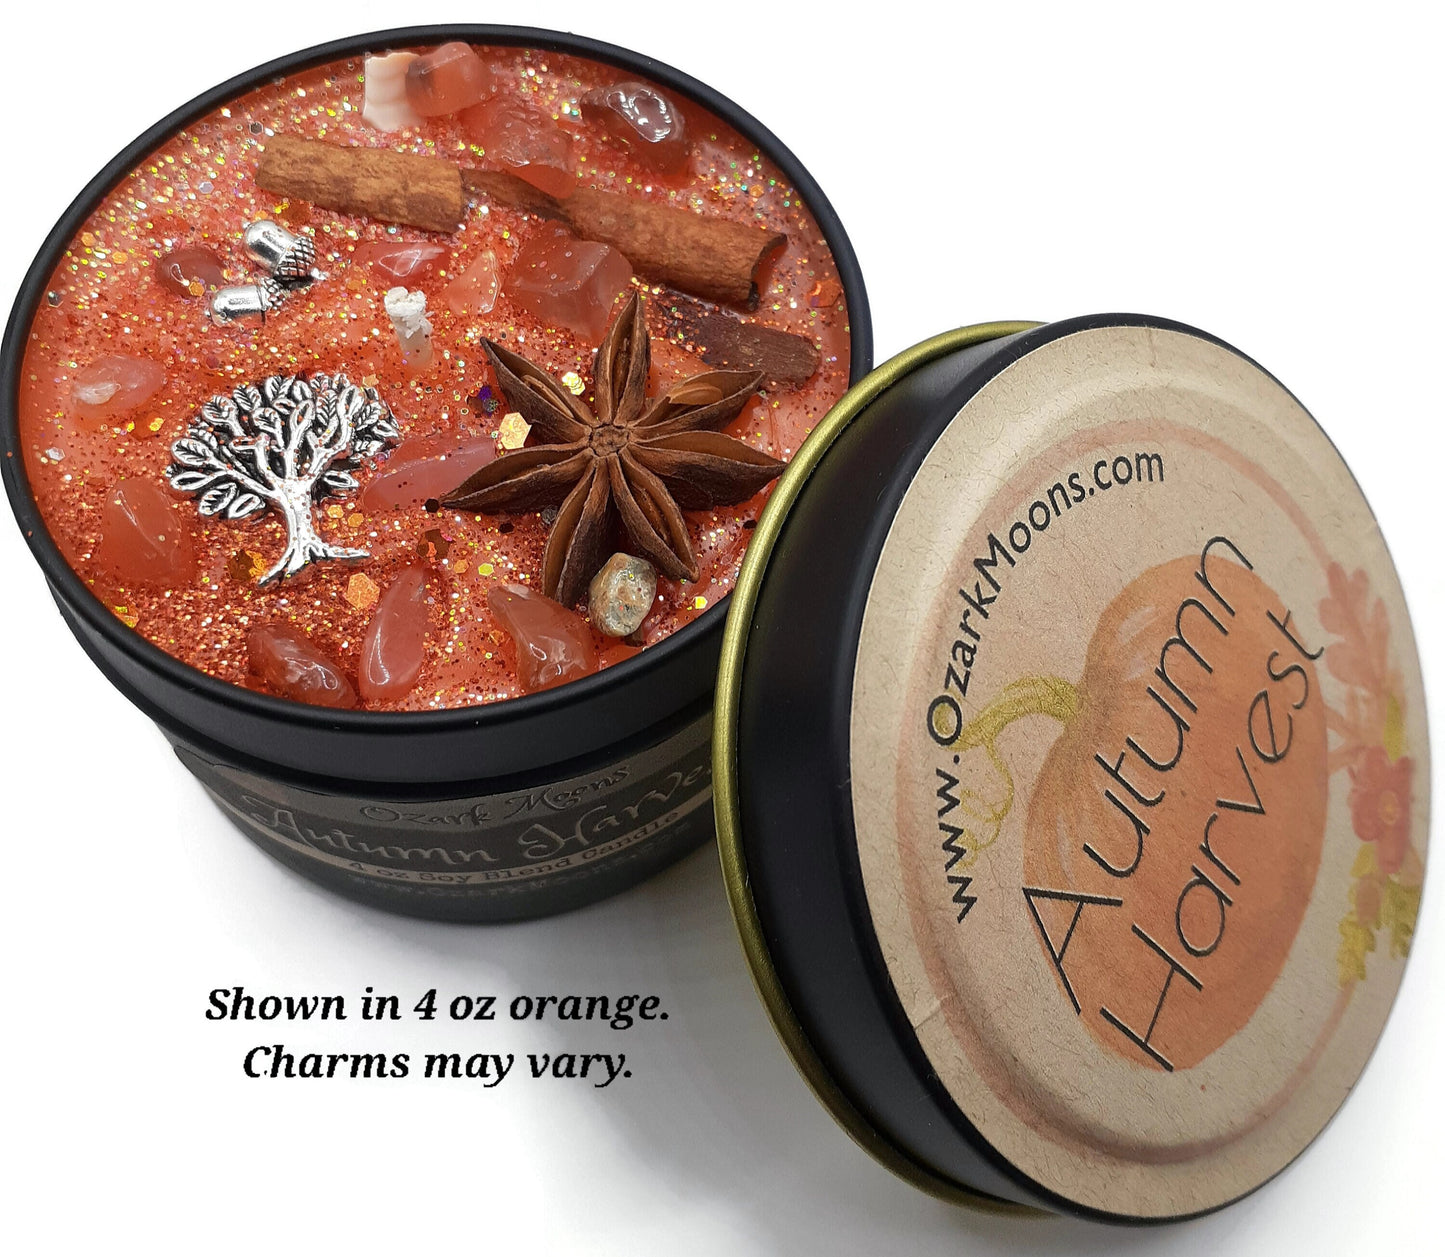 4 oz Candle Autumn Harvest - Soy Coconut Candles with Highly Scented Fall Leaves, Pumpkin, Apples, Molasses, Hayrides Scent in Tin with Lid